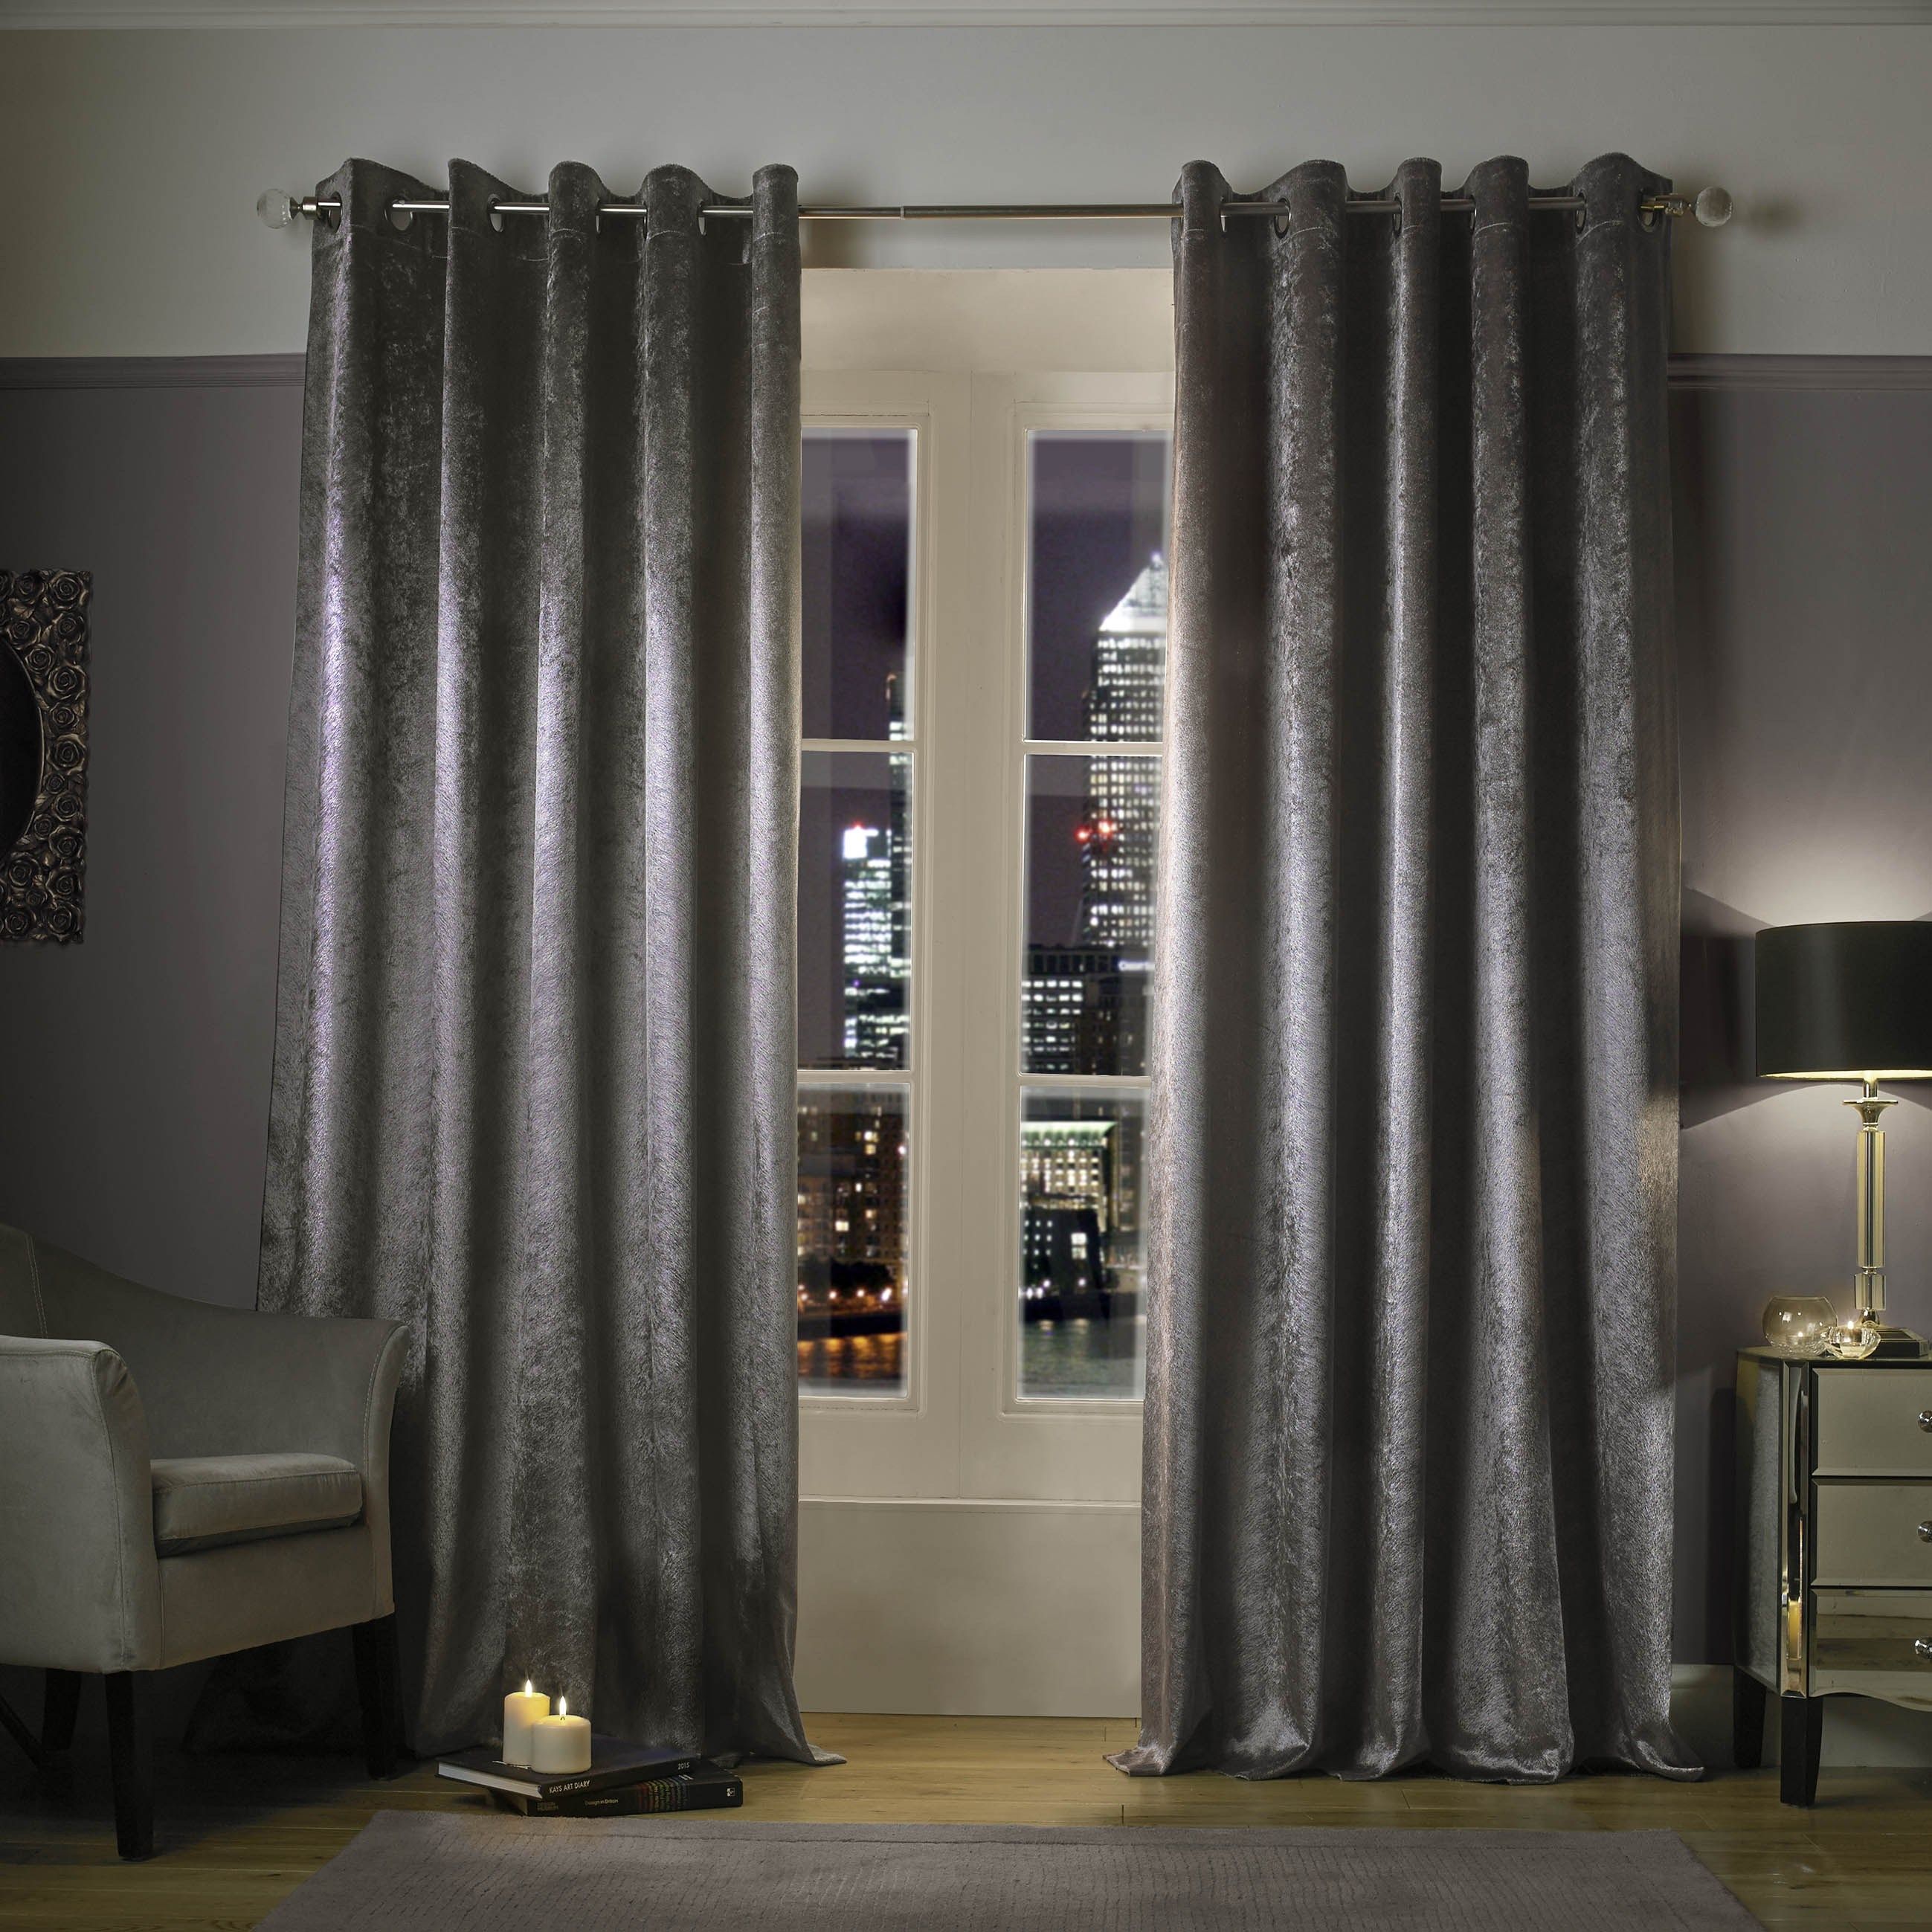 Lined Velvet Curtains Pertaining To Lined Velvet Curtains (View 1 of 15)